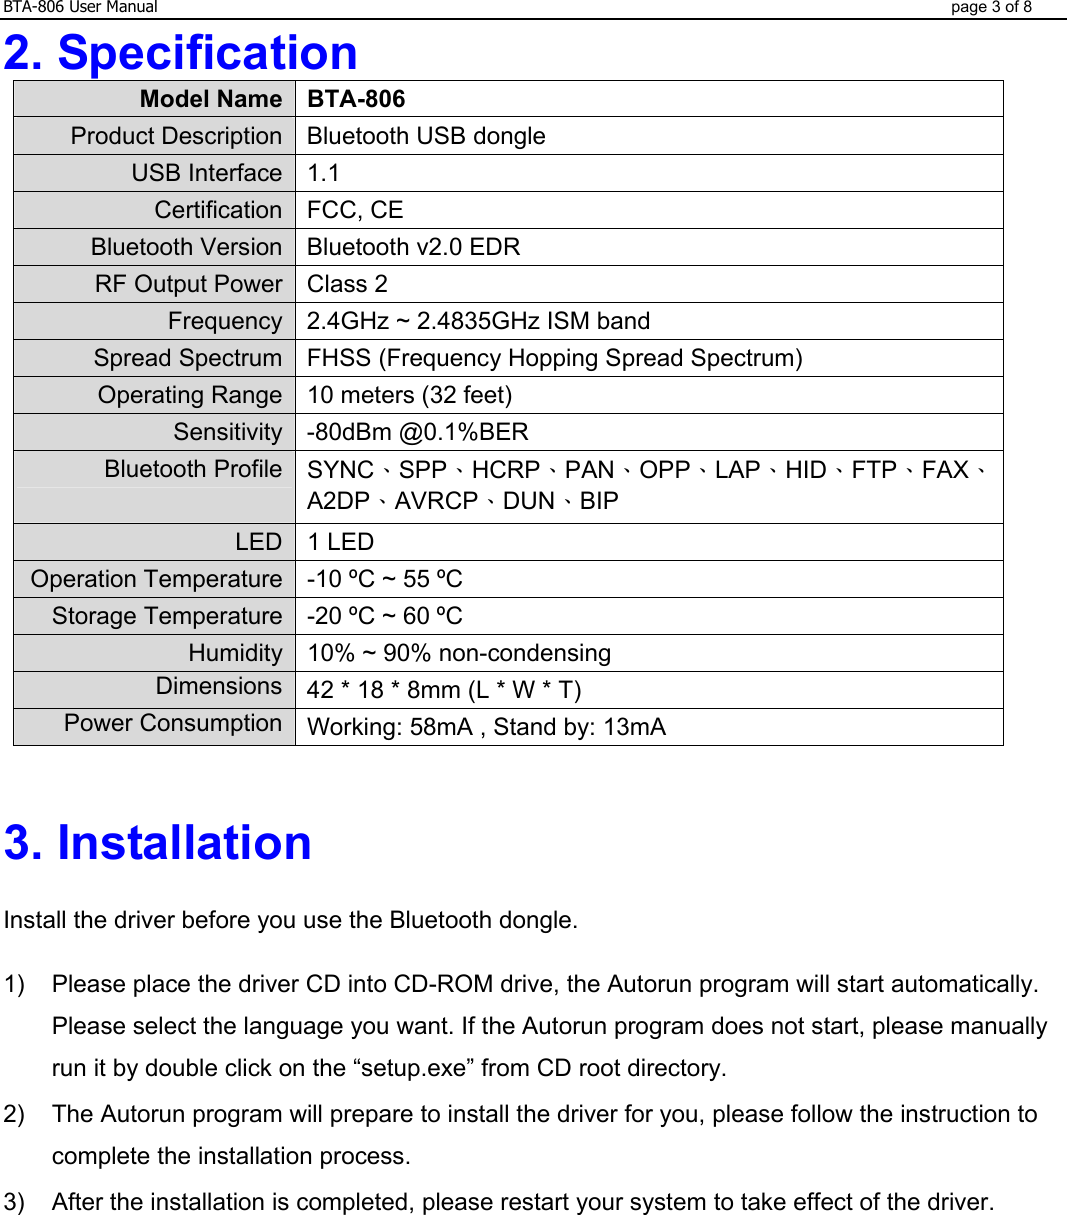 BTA-806 User Manual  page 3 of 8 2. Specification Model Name BTA-806 Product Description Bluetooth USB dongle USB Interface 1.1 Certification FCC, CE Bluetooth Version Bluetooth v2.0 EDR RF Output Power Class 2 Frequency 2.4GHz ~ 2.4835GHz ISM band Spread Spectrum FHSS (Frequency Hopping Spread Spectrum) Operating Range 10 meters (32 feet) Sensitivity -80dBm @0.1%BER Bluetooth Profile SYNC、SPP、HCRP、PAN、OPP、LAP、HID、FTP、FAX、A2DP、AVRCP、DUN、BIP LED 1 LED Operation Temperature -10 ºC ~ 55 ºC Storage Temperature -20 ºC ~ 60 ºC Humidity 10% ~ 90% non-condensing Dimensions 42 * 18 * 8mm (L * W * T) Power Consumption Working: 58mA , Stand by: 13mA   3. Installation    Install the driver before you use the Bluetooth dongle.  1)  Please place the driver CD into CD-ROM drive, the Autorun program will start automatically. Please select the language you want. If the Autorun program does not start, please manually run it by double click on the “setup.exe” from CD root directory. 2)  The Autorun program will prepare to install the driver for you, please follow the instruction to complete the installation process. 3)  After the installation is completed, please restart your system to take effect of the driver.     